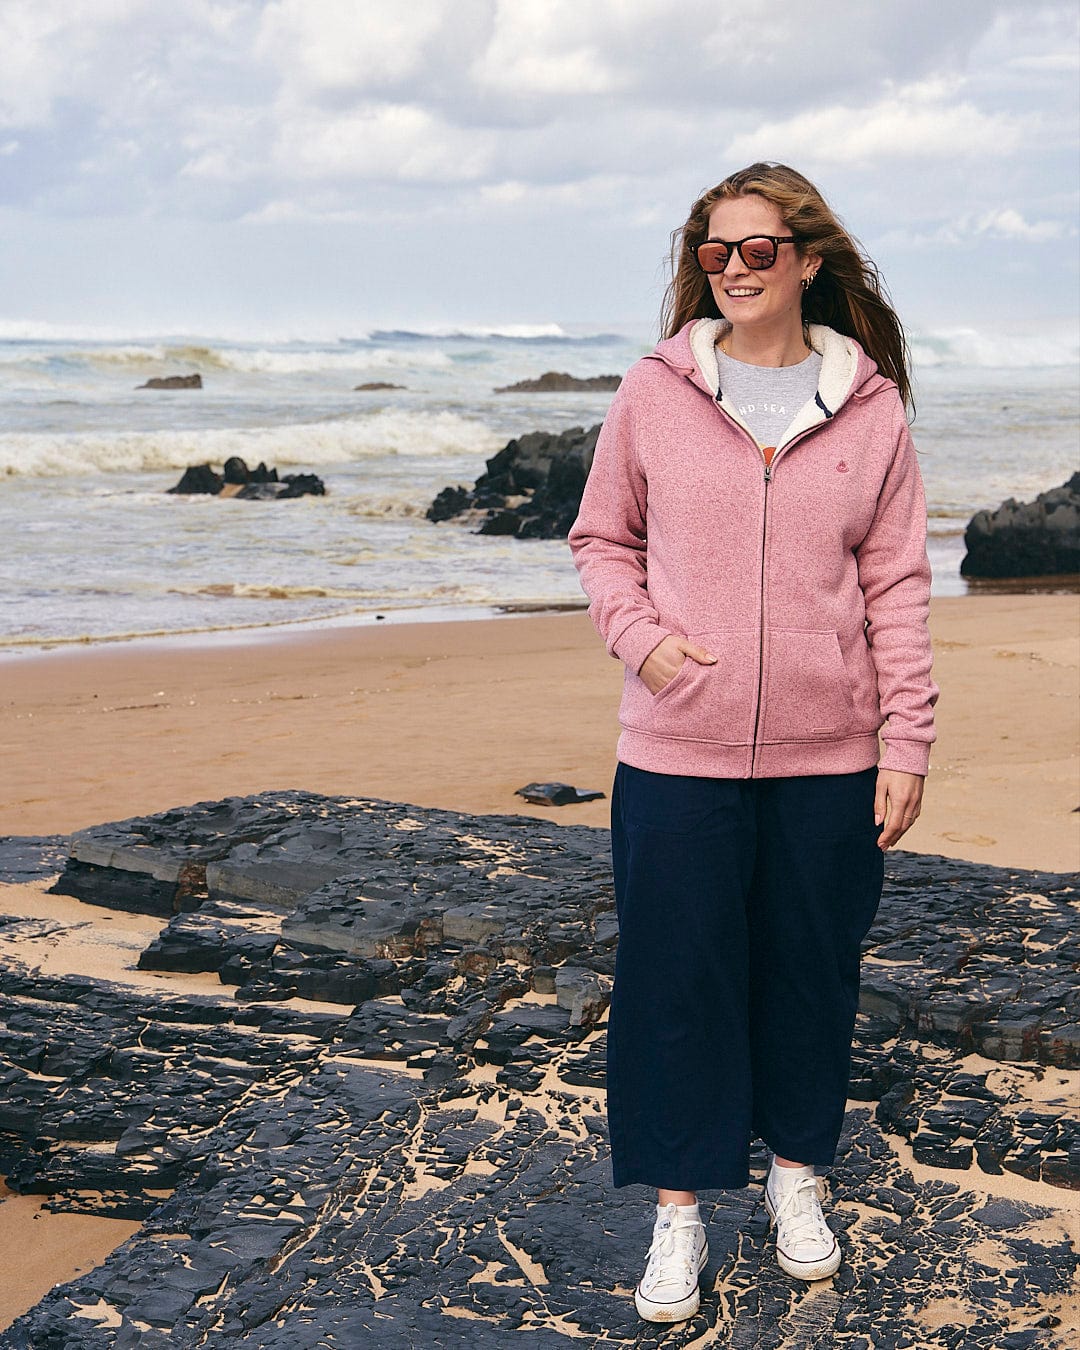 A woman enjoying an adventure on the beach, clad in a comfortable Saltrock Galak - Womens Fur Lined Hoody - Pink.